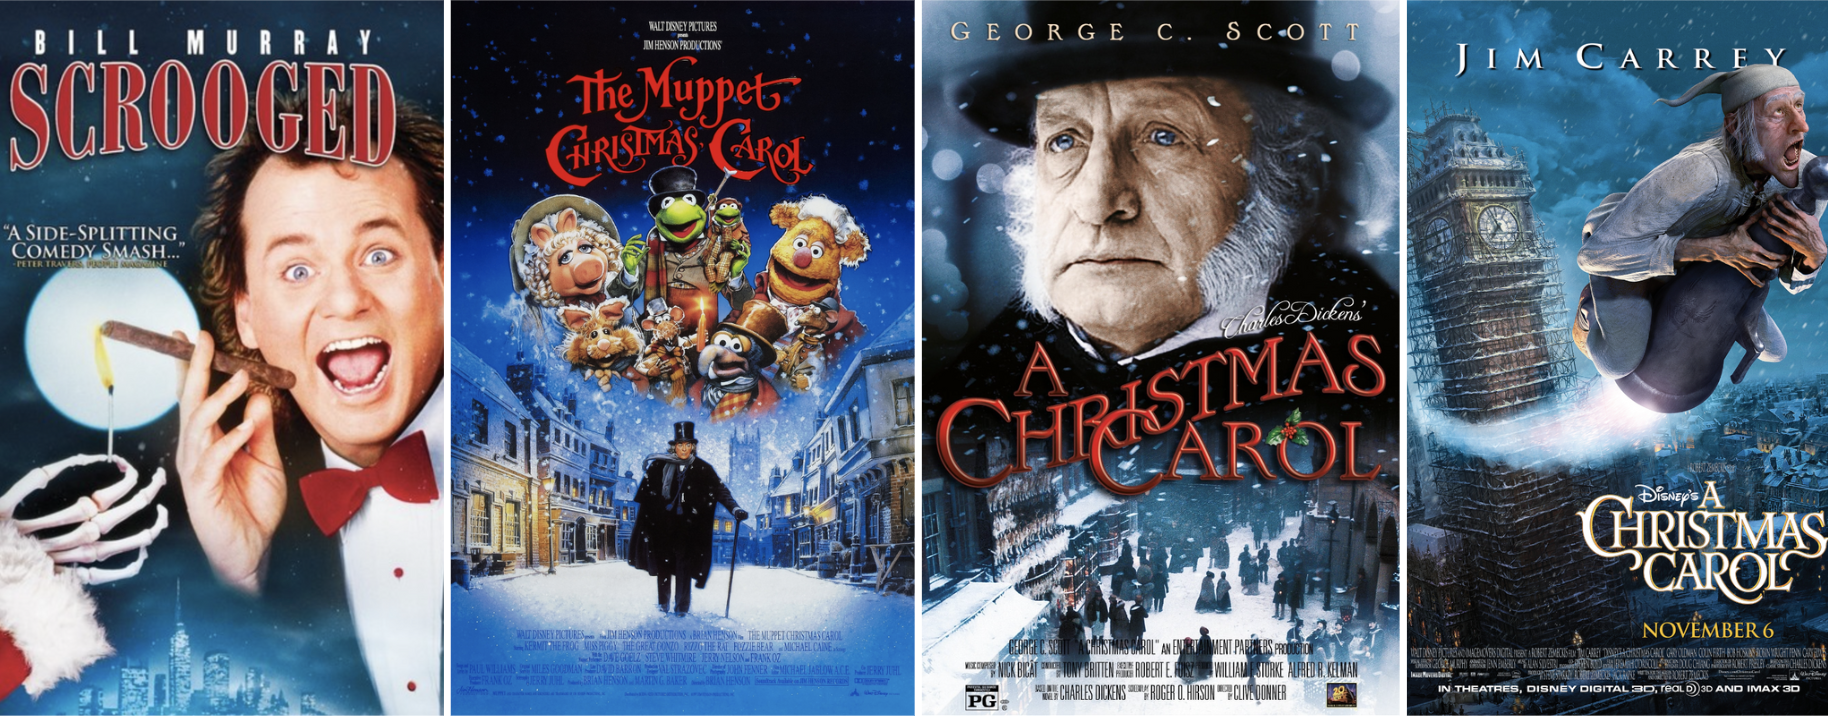 posters for A Christmas Carol different versions